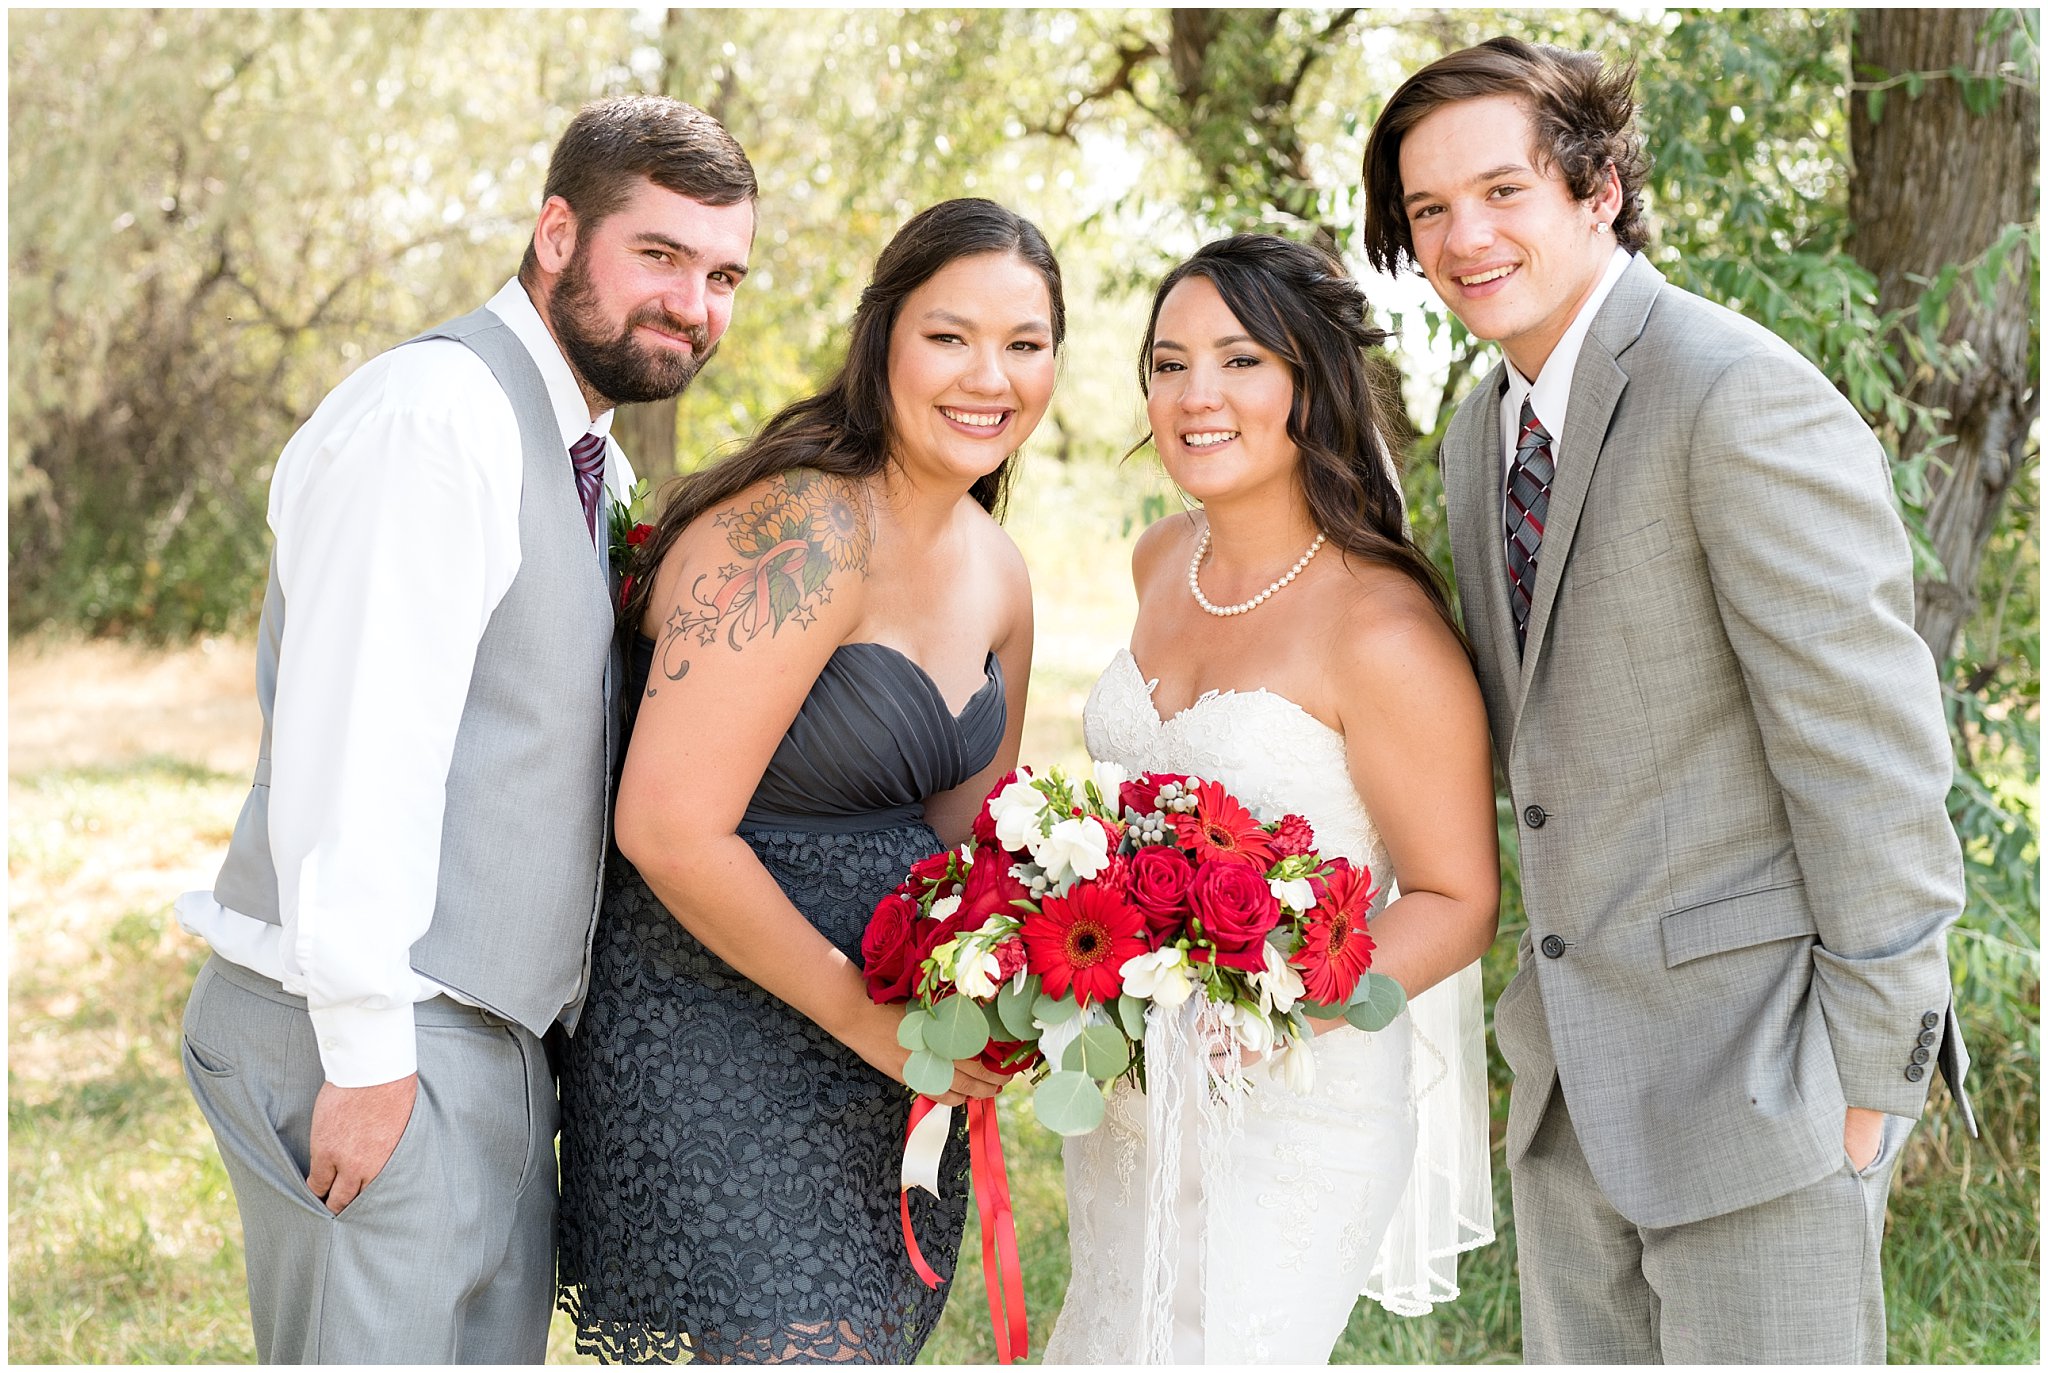 Siblings of the bride and the bride smiling | Red and Grey wedding | Davis County Outdoor Wedding | Jessie and Dallin Photography